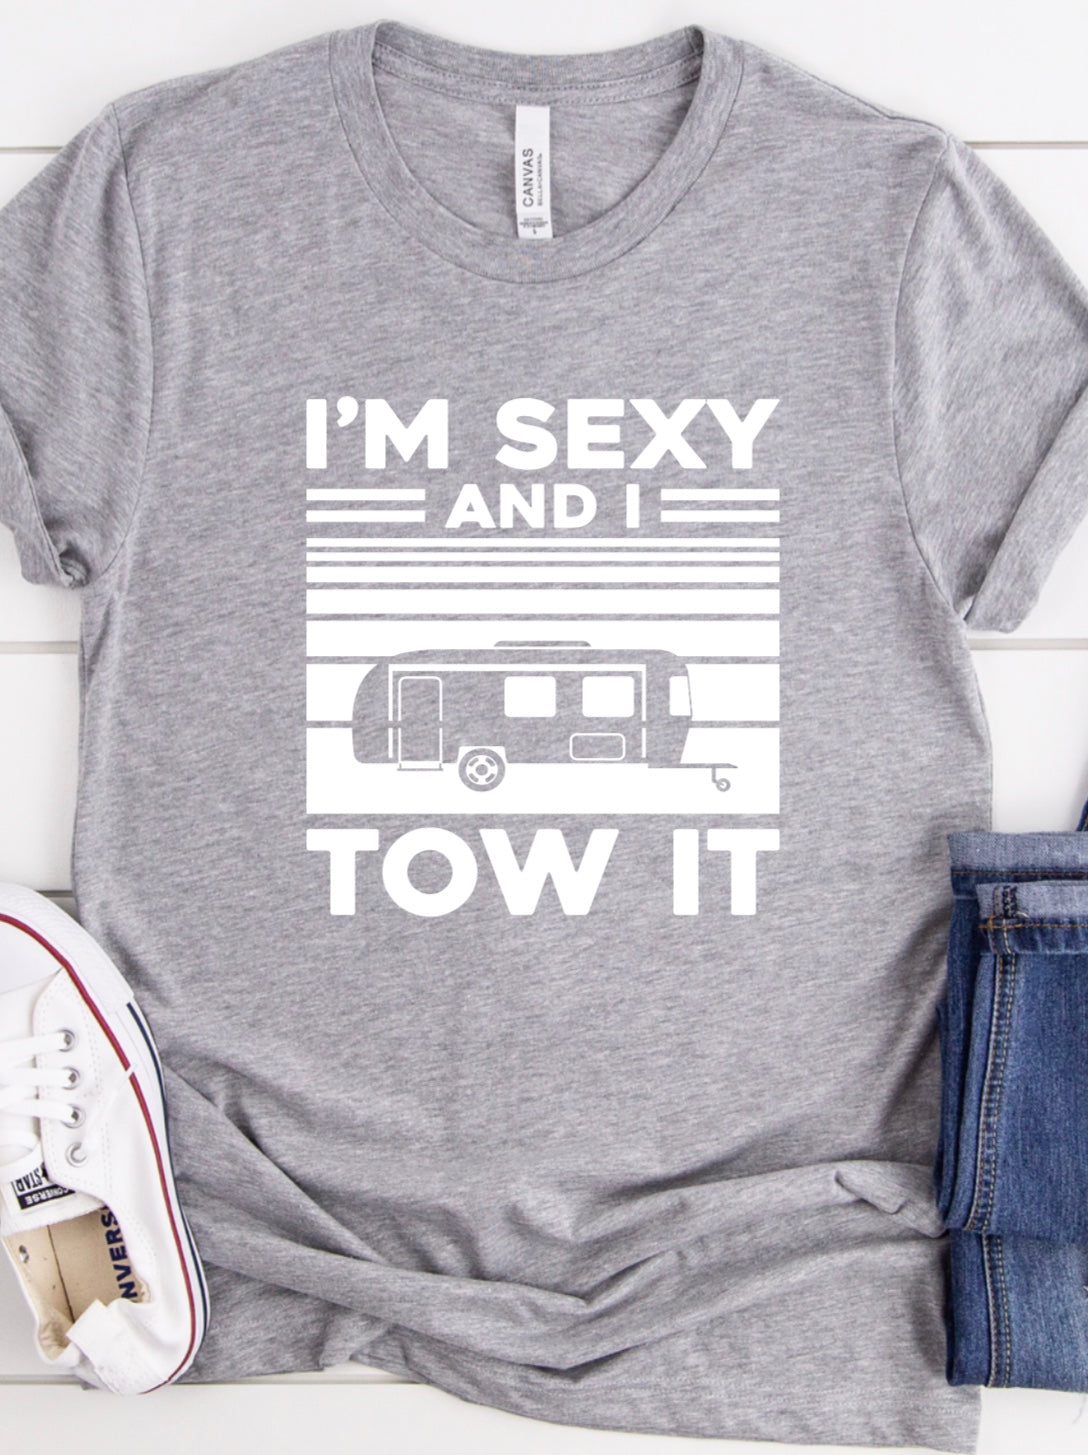 I’m sexy and I tow it t-shirt 